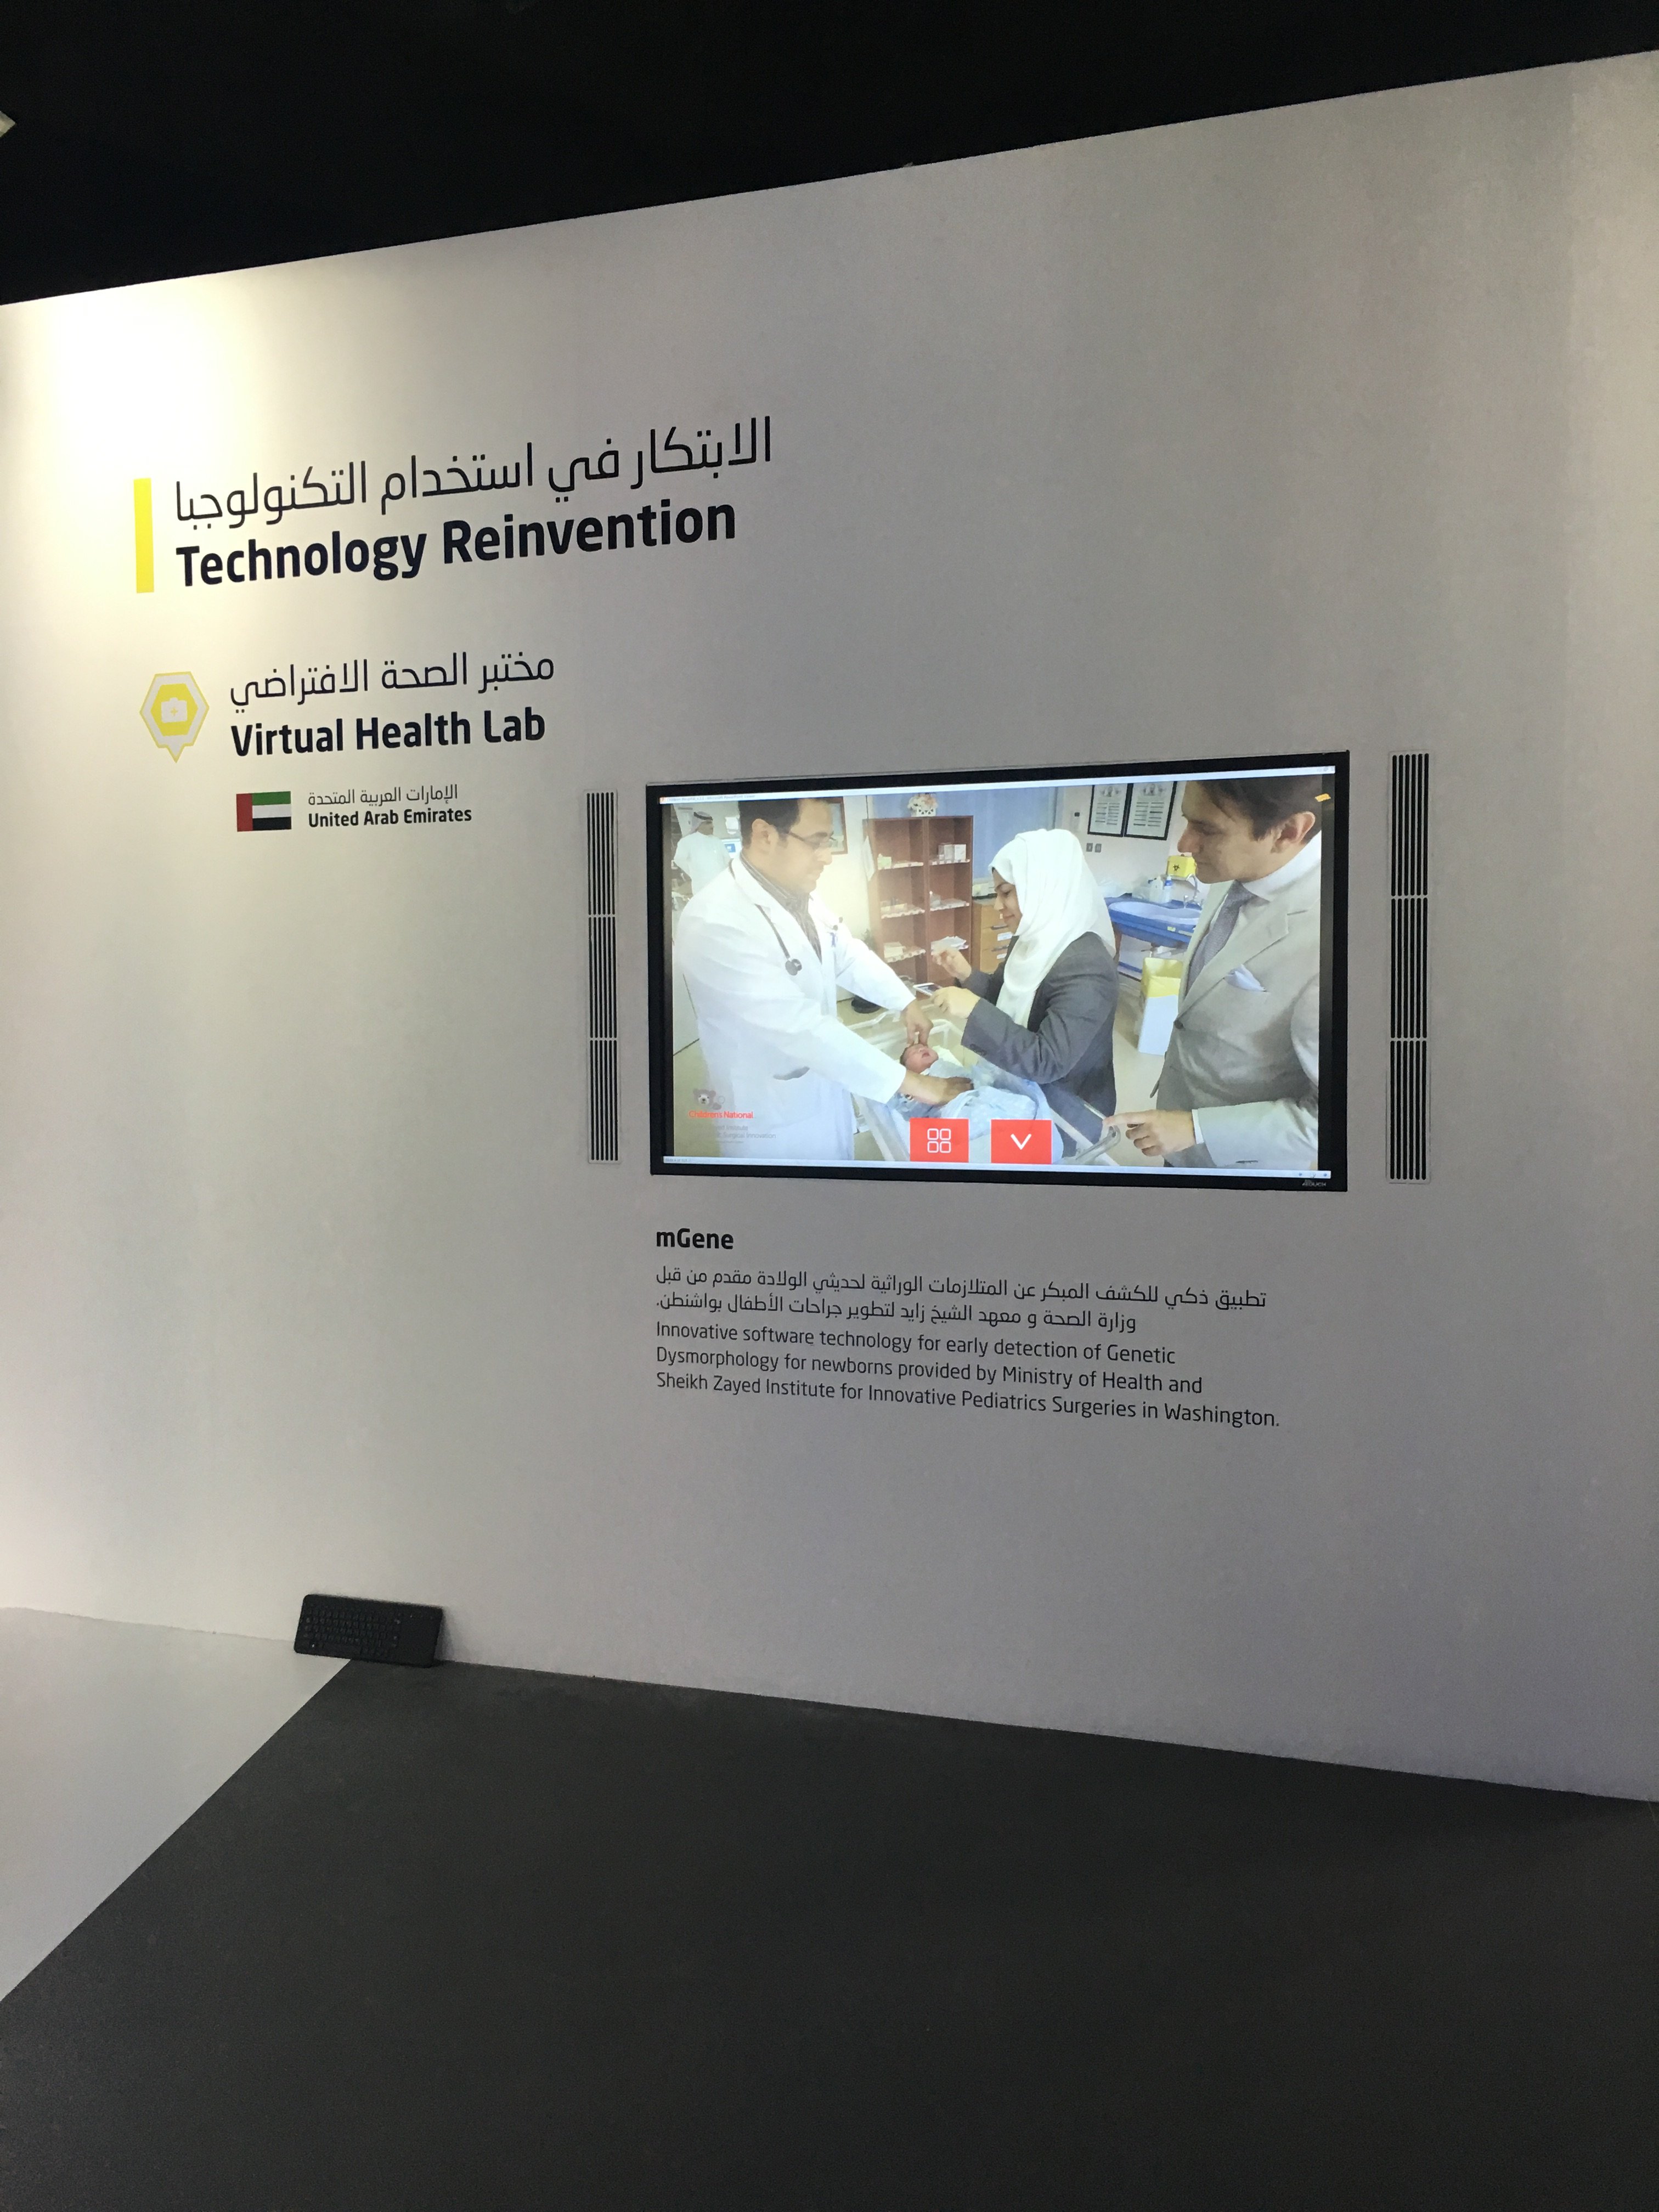 Sheikh Zayed Institute display at the World Government Summit